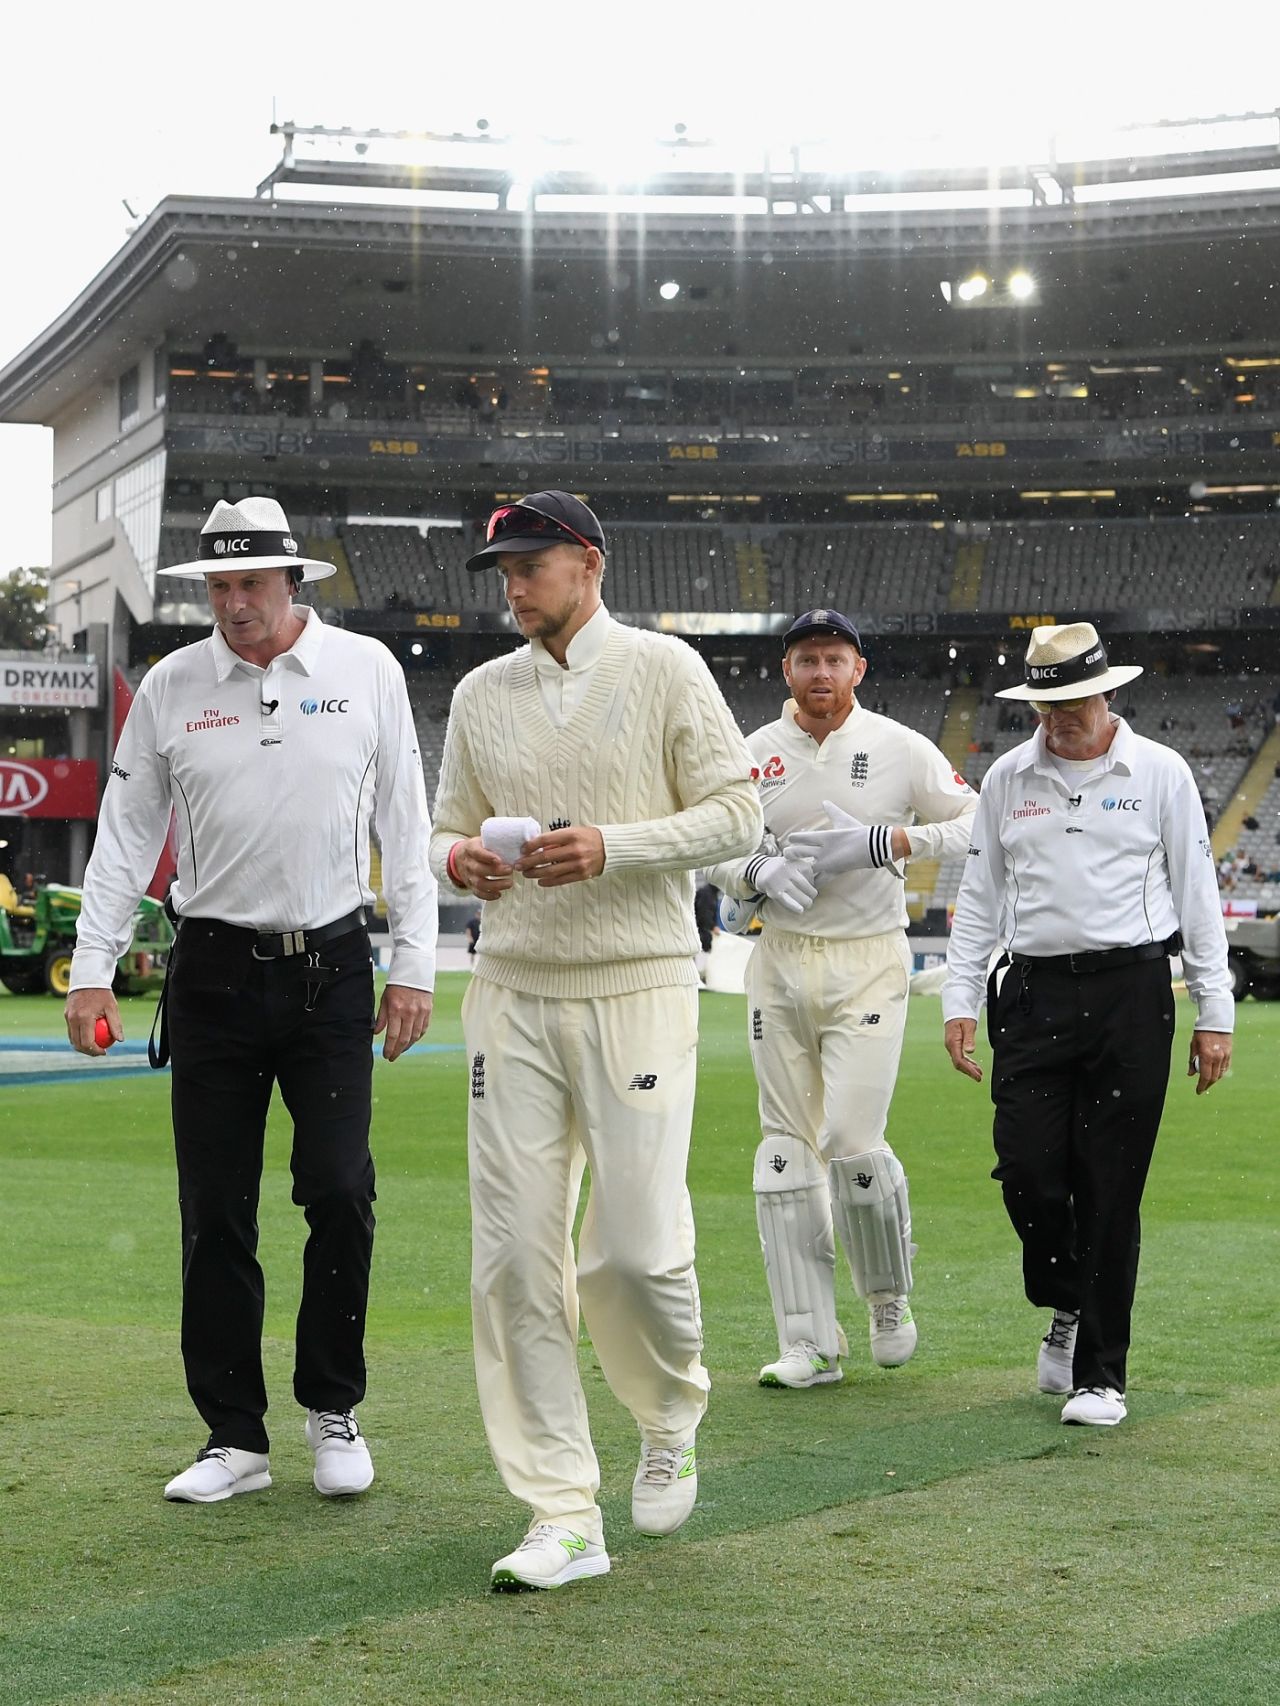 Joe Root walks off the field as rain sets in, New Zealand v England, 1st Test, Auckland, 3rd day, March 24, 2018